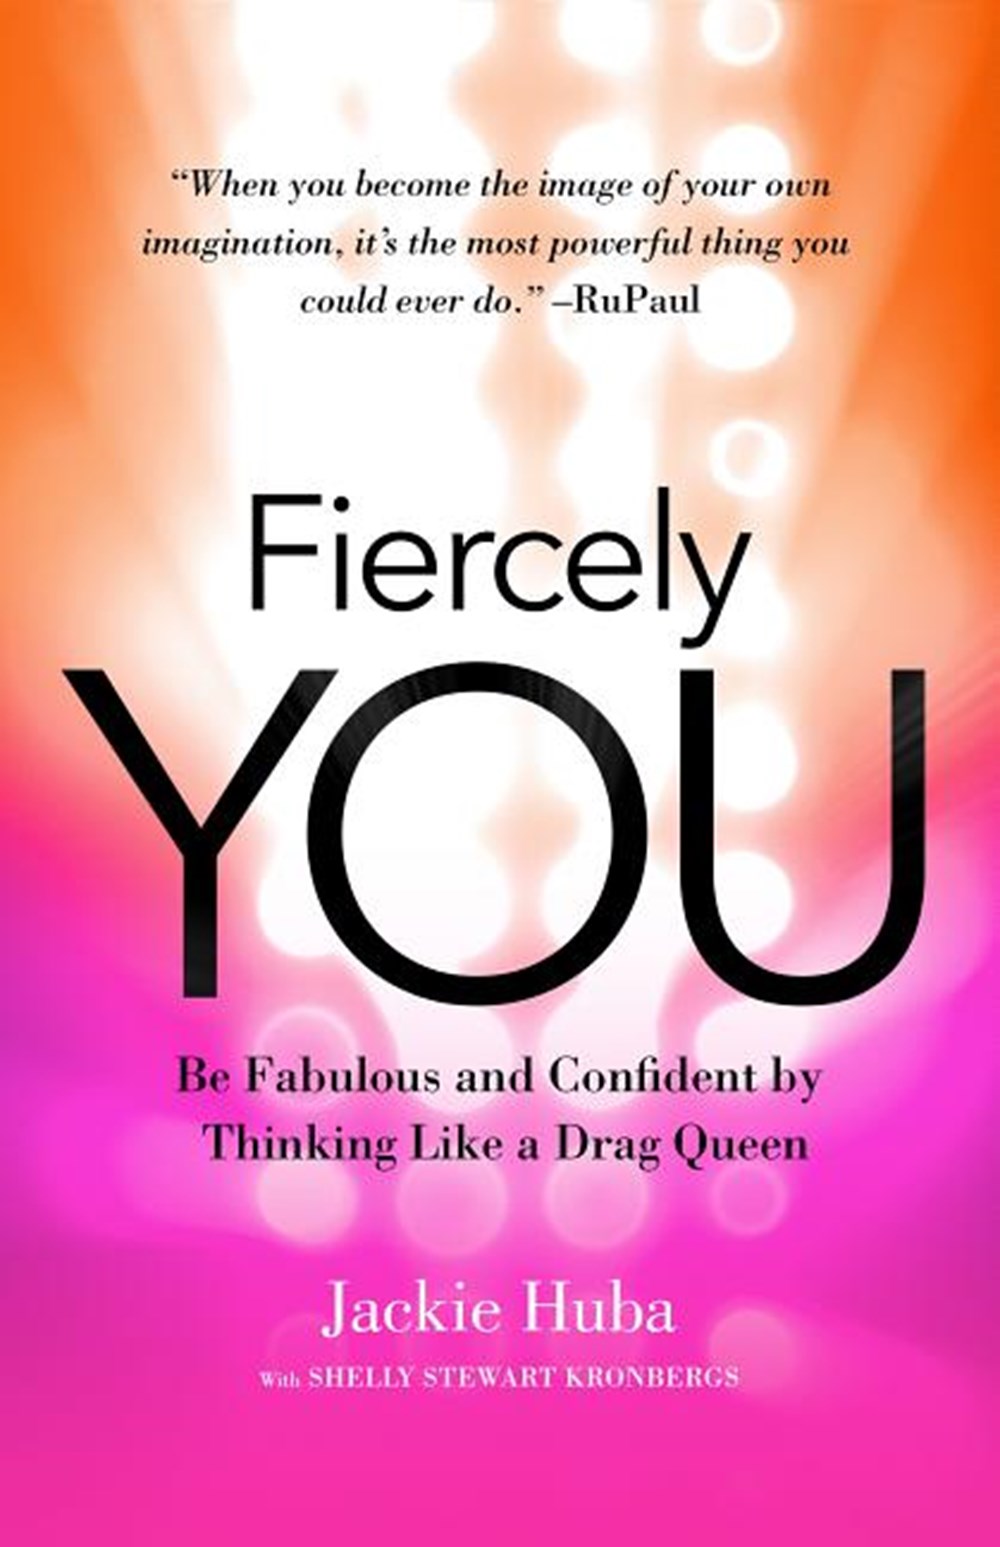 Fiercely You Be Fabulous and Confident by Thinking Like a Drag Queen